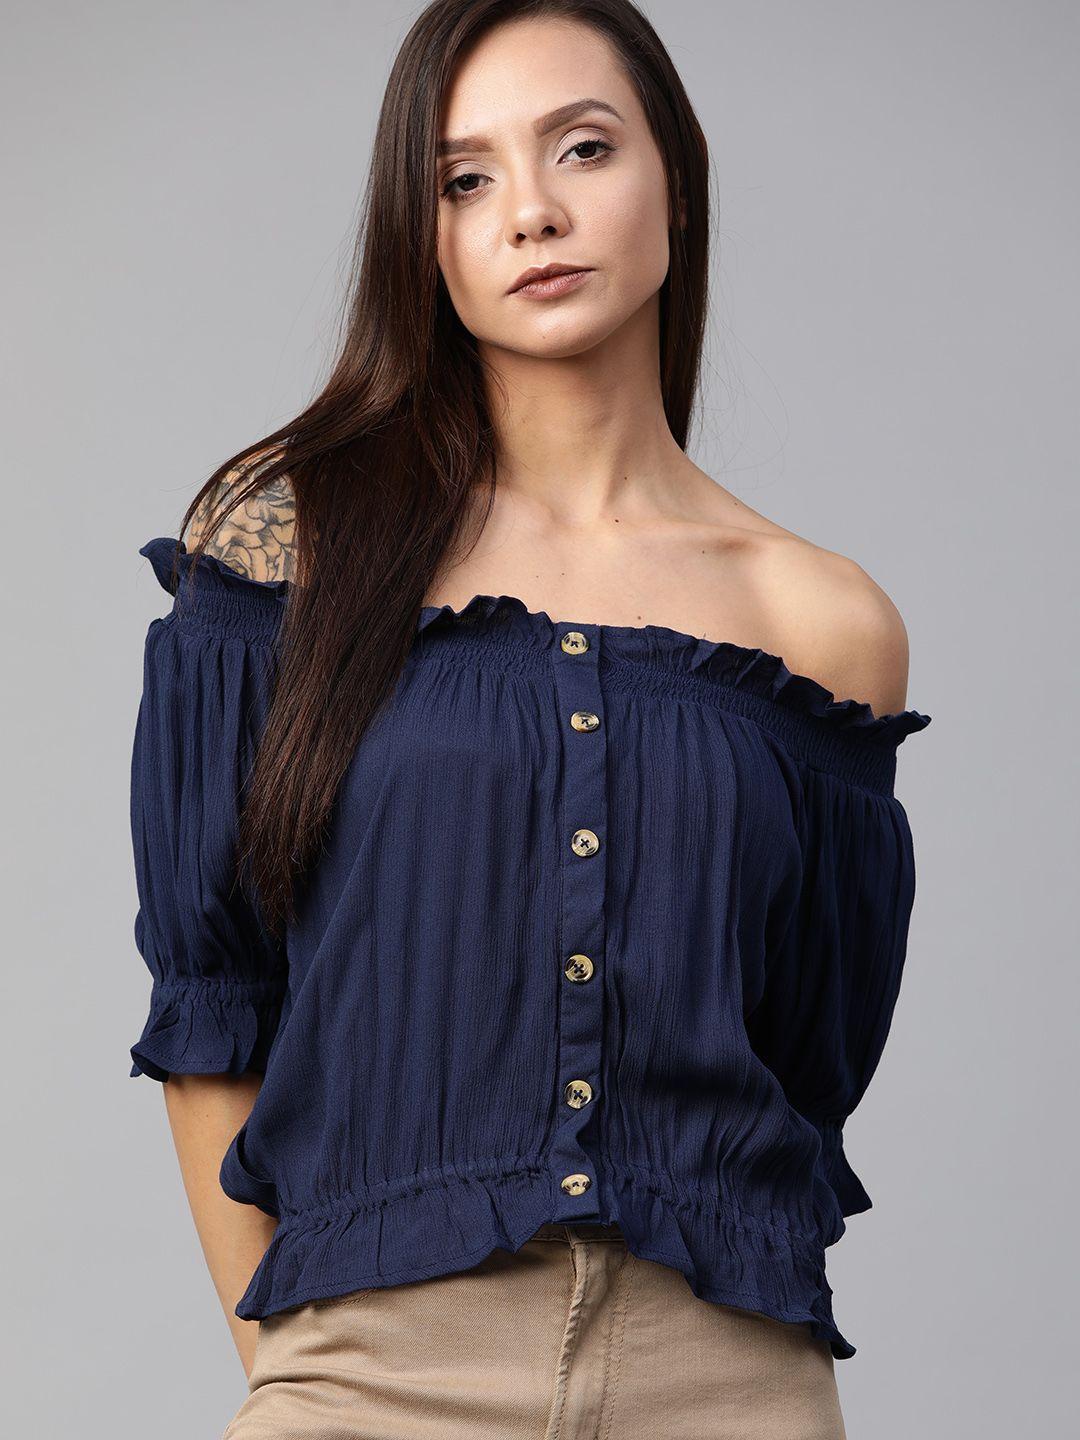 the roadster lifestyle co women navy blue solid crinkled ruffled bardot sustainable top